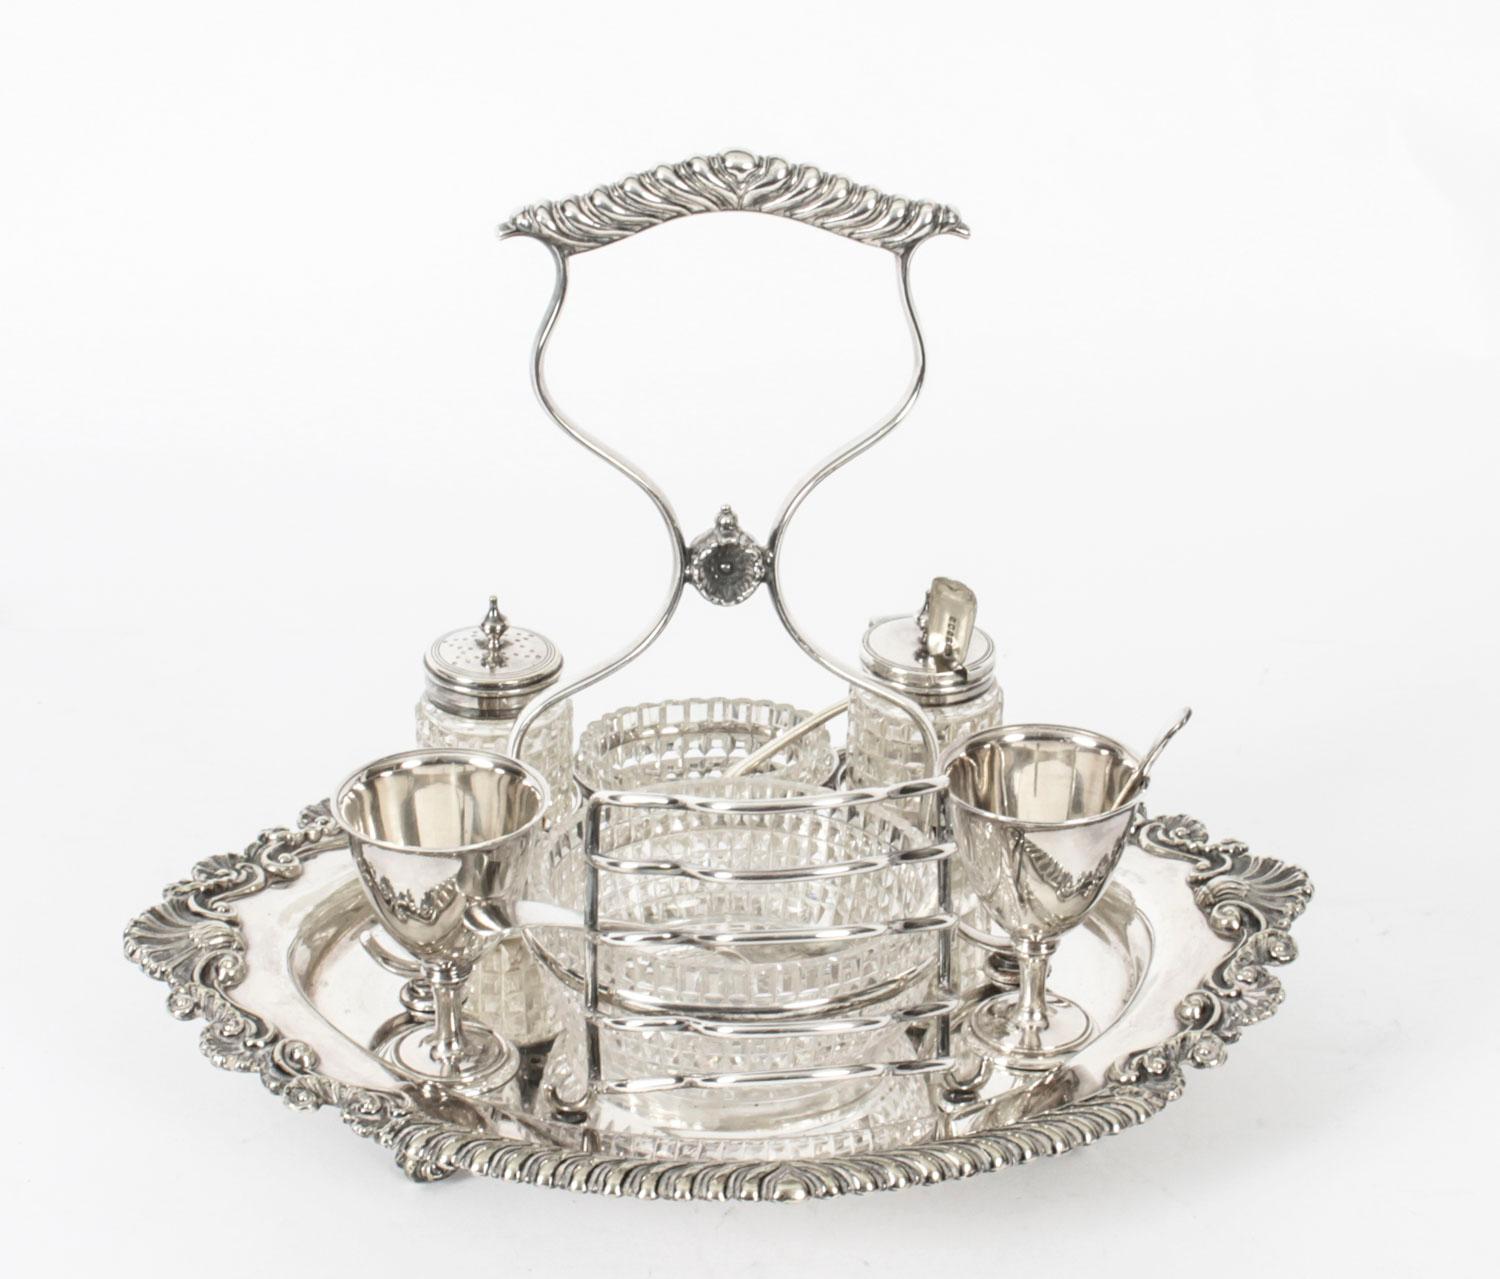 This is an exquisite antique English Victorian silver plated breakfast set bearing the makers mark HH& S for Harrison brothers & Howson and the inventory number 4373, Circa 1860 in date.
 
This splendid set comprises a toast rack, salt and pepper